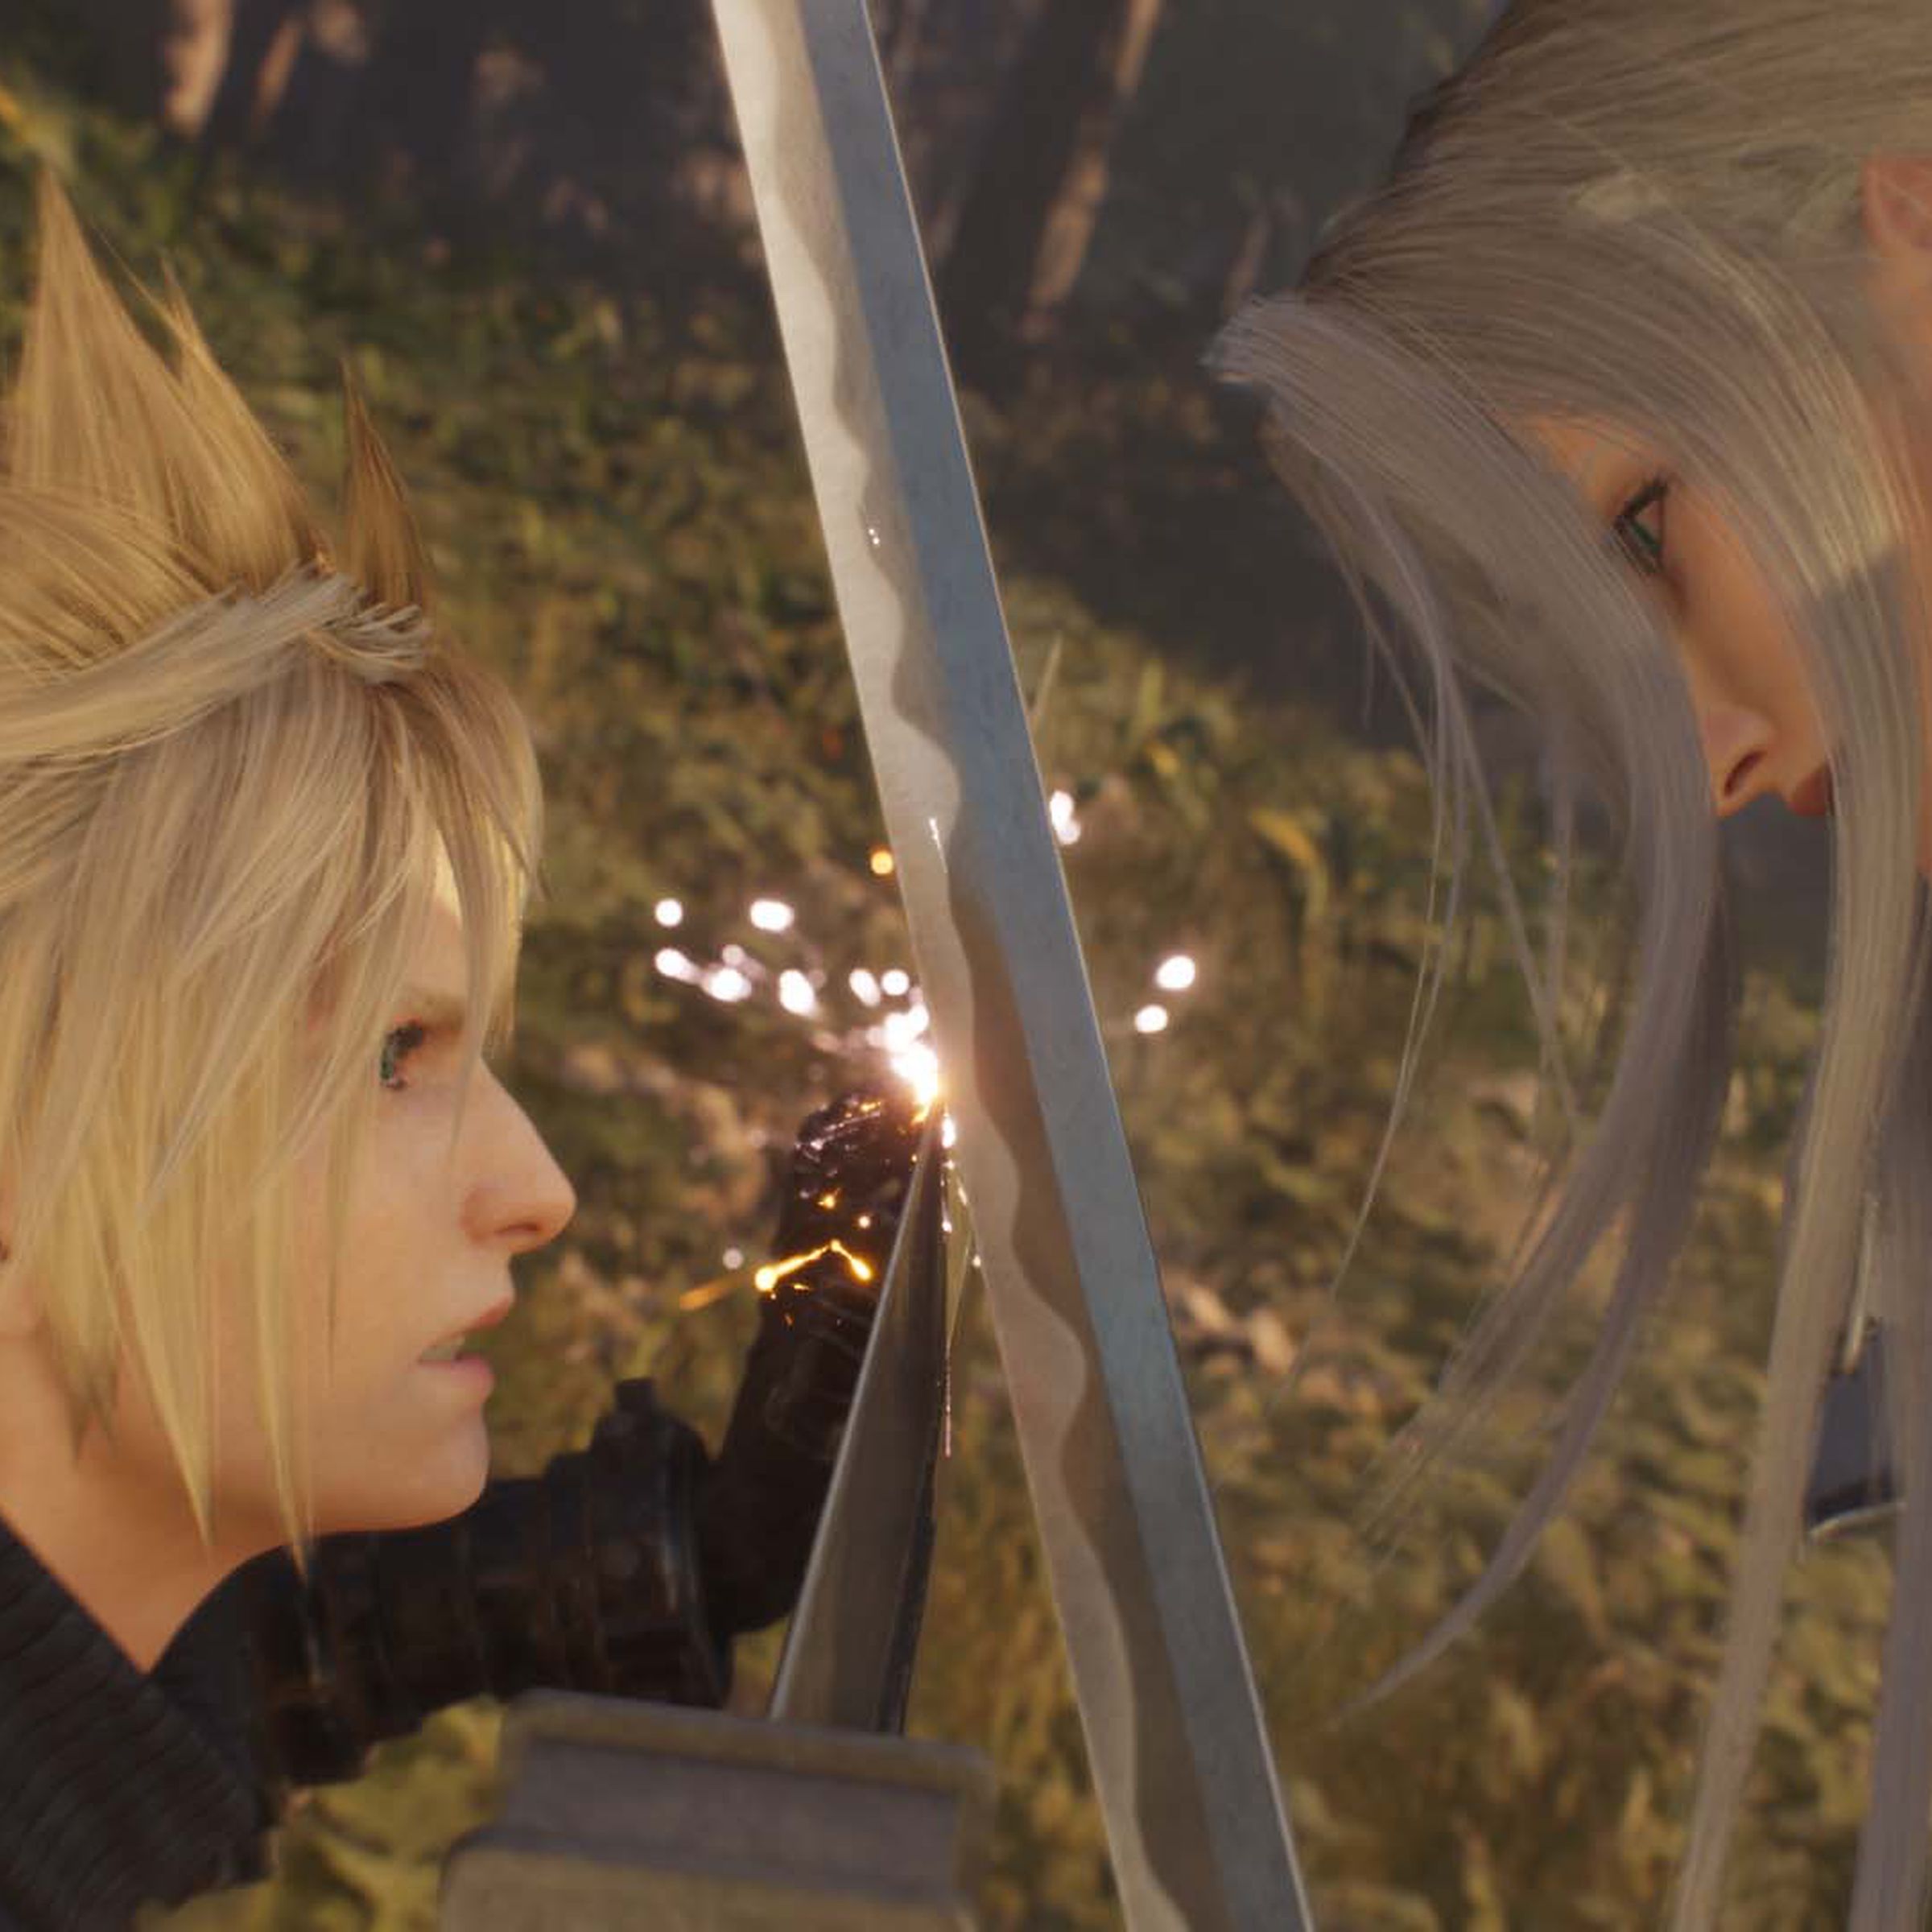 Screenshot from Final Fantasy VII Rebirth featuring a close up of Cloud (left) and Sephiroth (right) clashing swords.